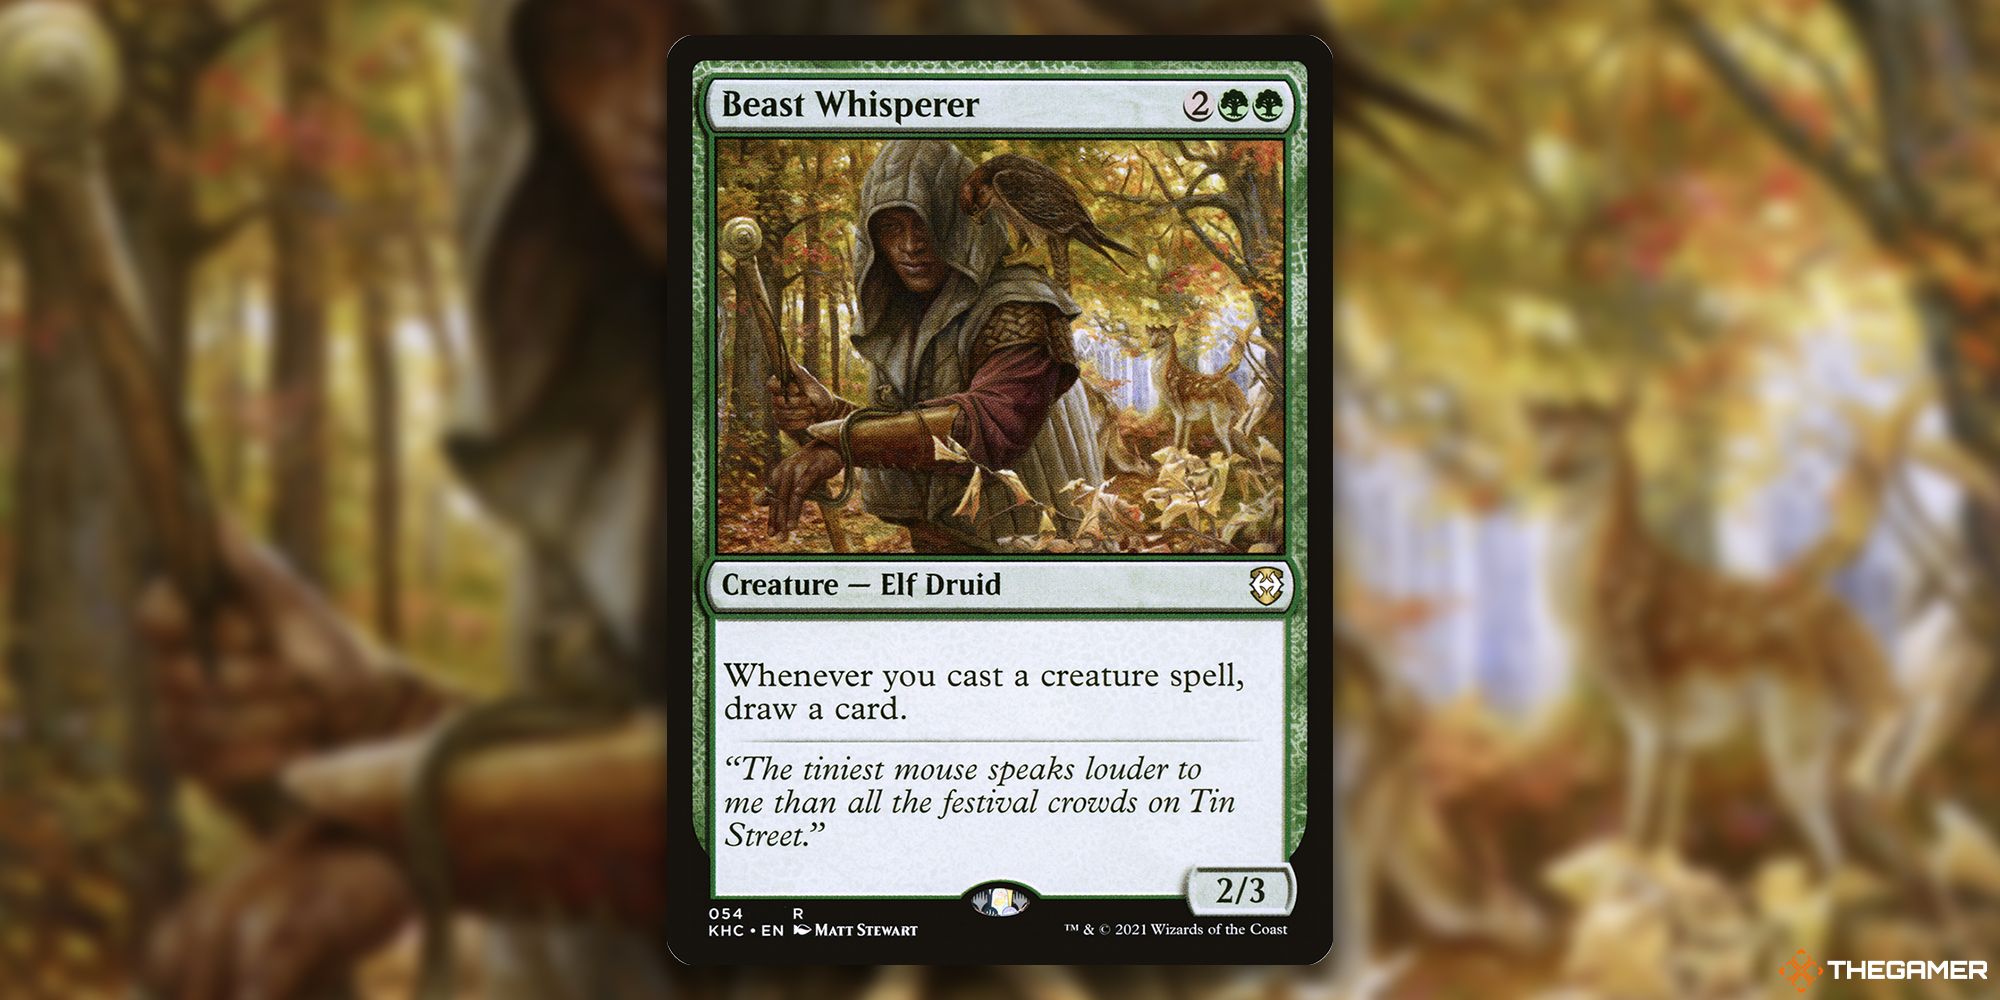 Image of the Beast Whisperer card in Magic: The Gathering, with art by Matt Stewart